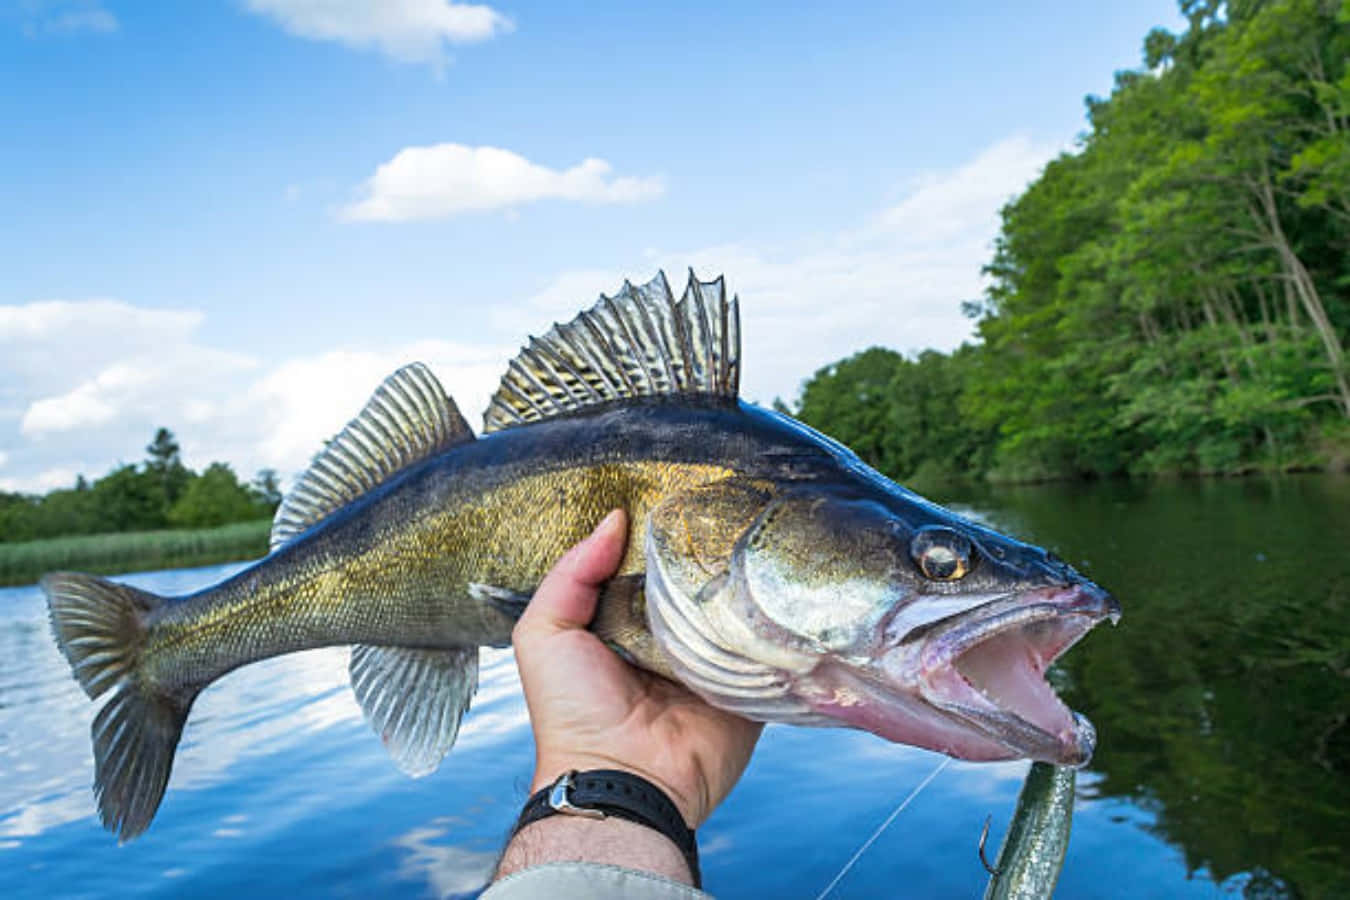 "A close-up of a walleye, a freshwater fish native to North America"